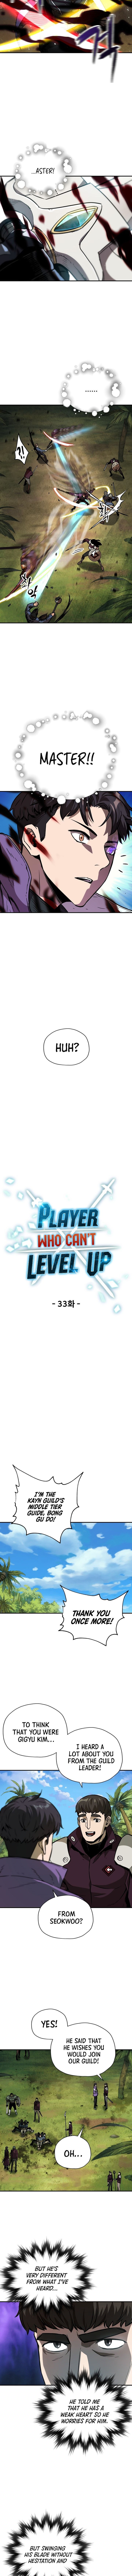 player_who_cant_level_up_33_3